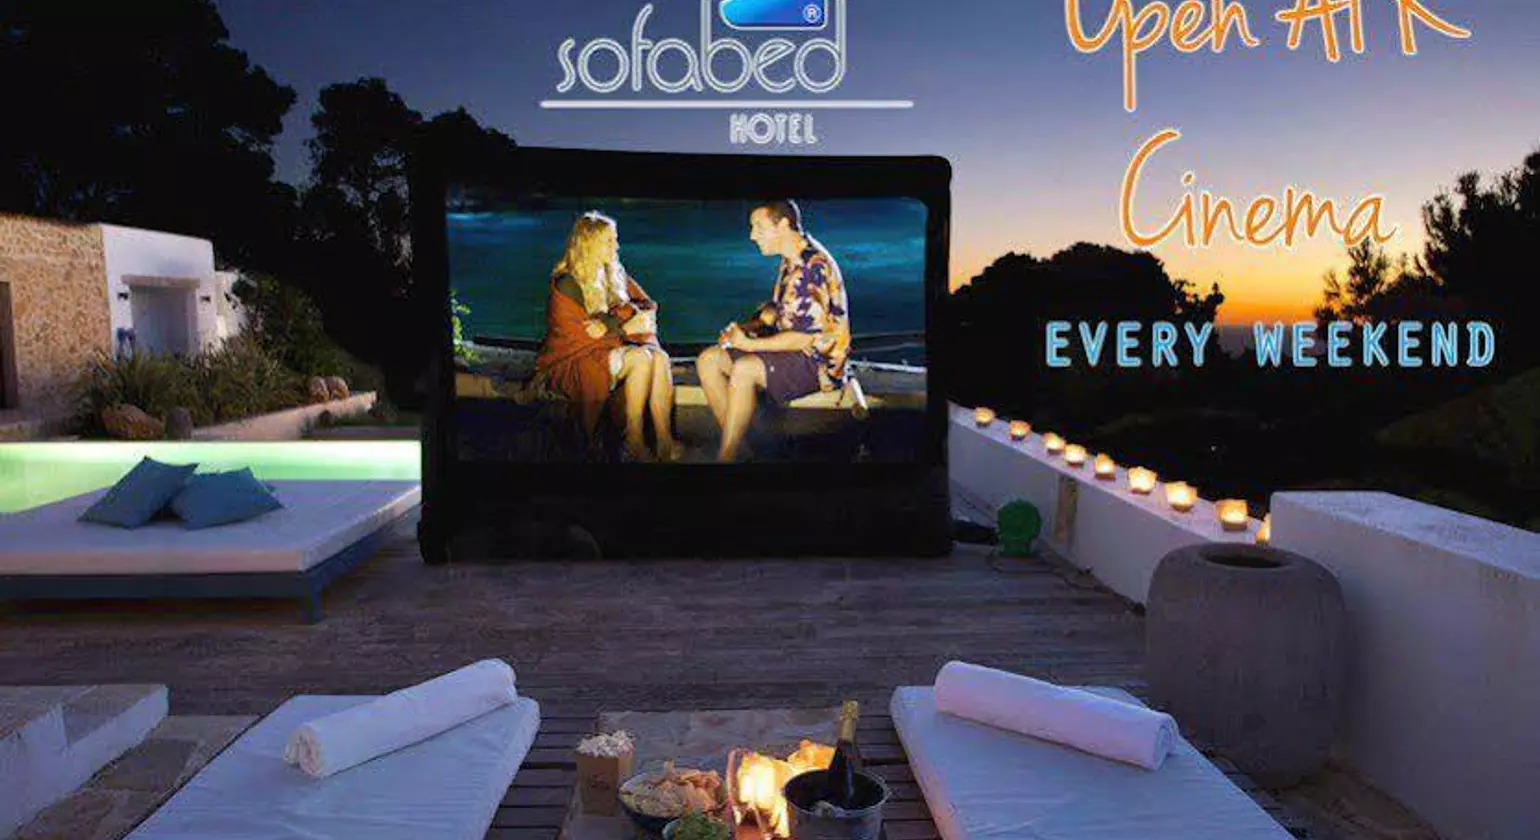 Sofabed Boutique Hotel